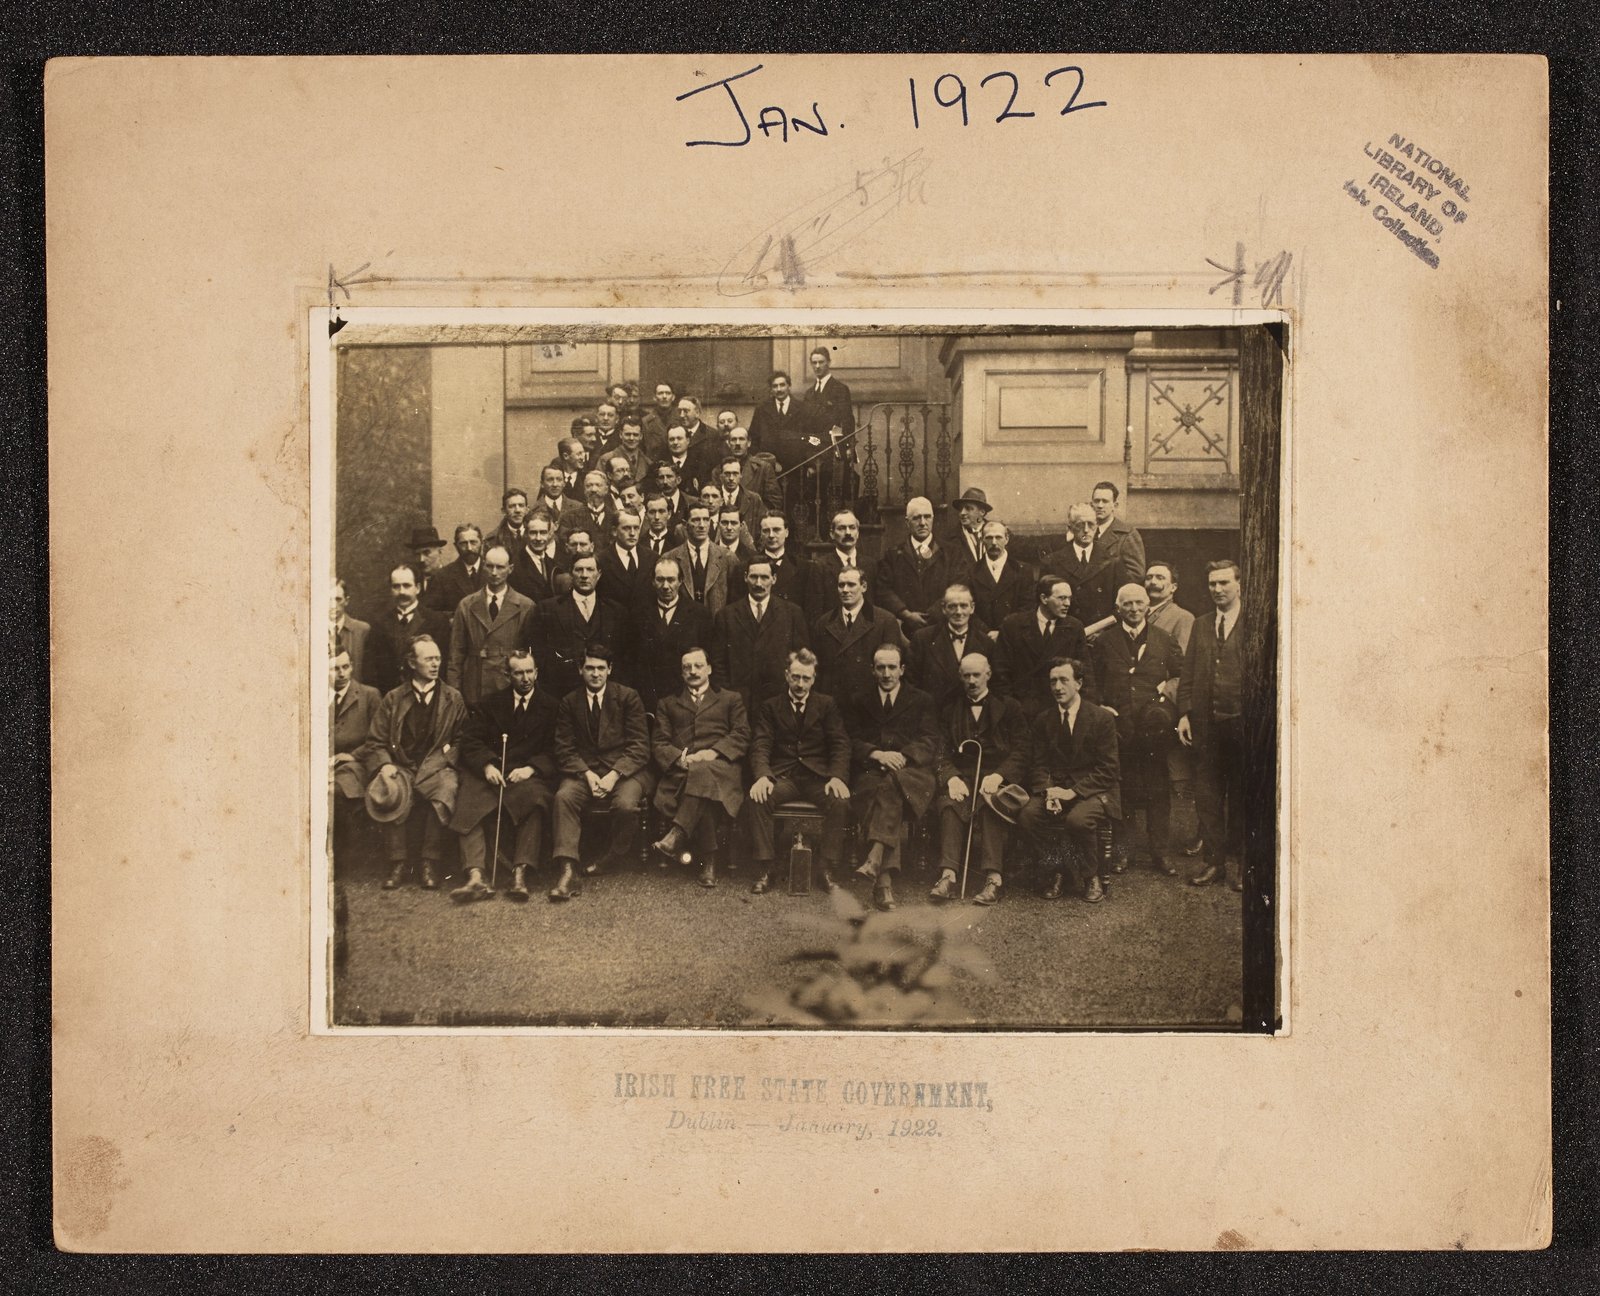 Image - The new provisional government of Ireland, photographed with supporters in January 1922. Image courtesy of the National Library of Ireland